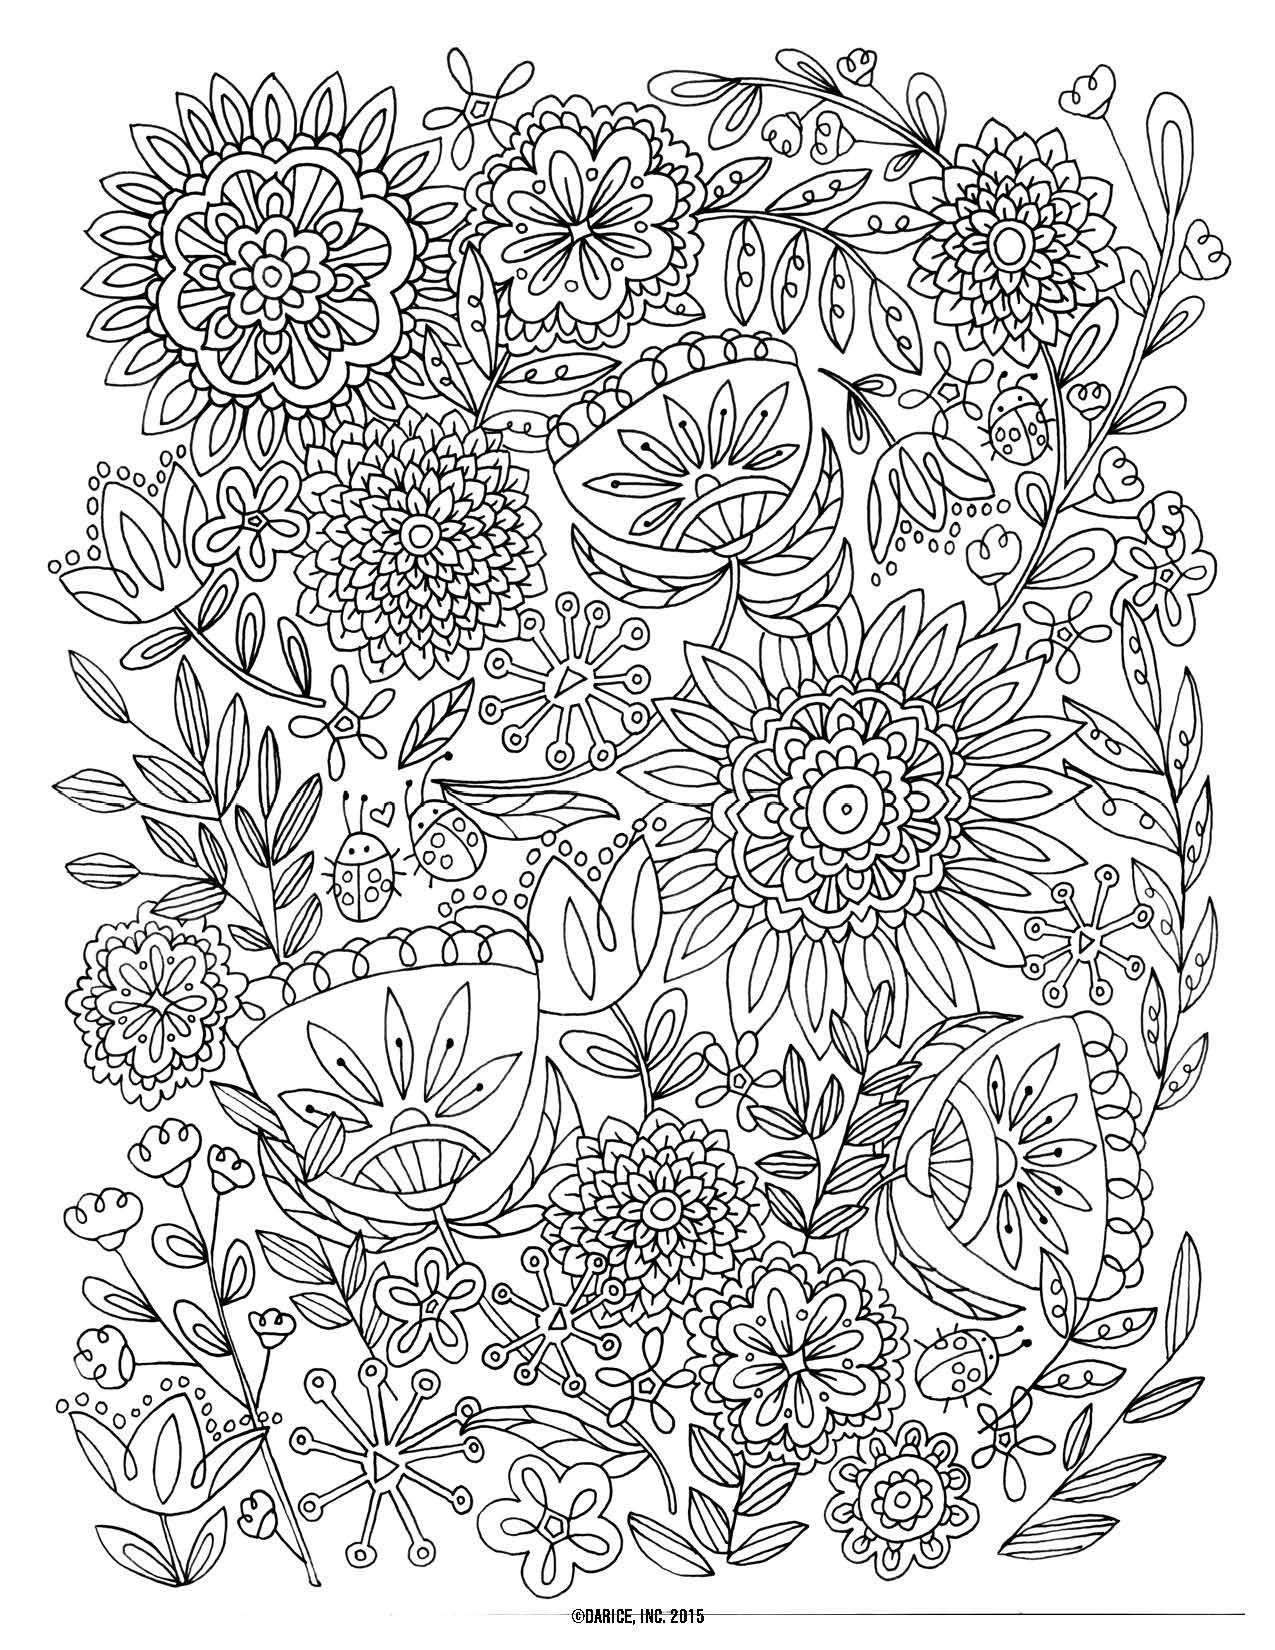 18 Cute Milk Can Vase 2024 free download milk can vase of coloring sheets for girls flowers printable cool vases flower vase within coloring sheets for girls flowers printable cool vases flower vase coloring page pages flowers in a